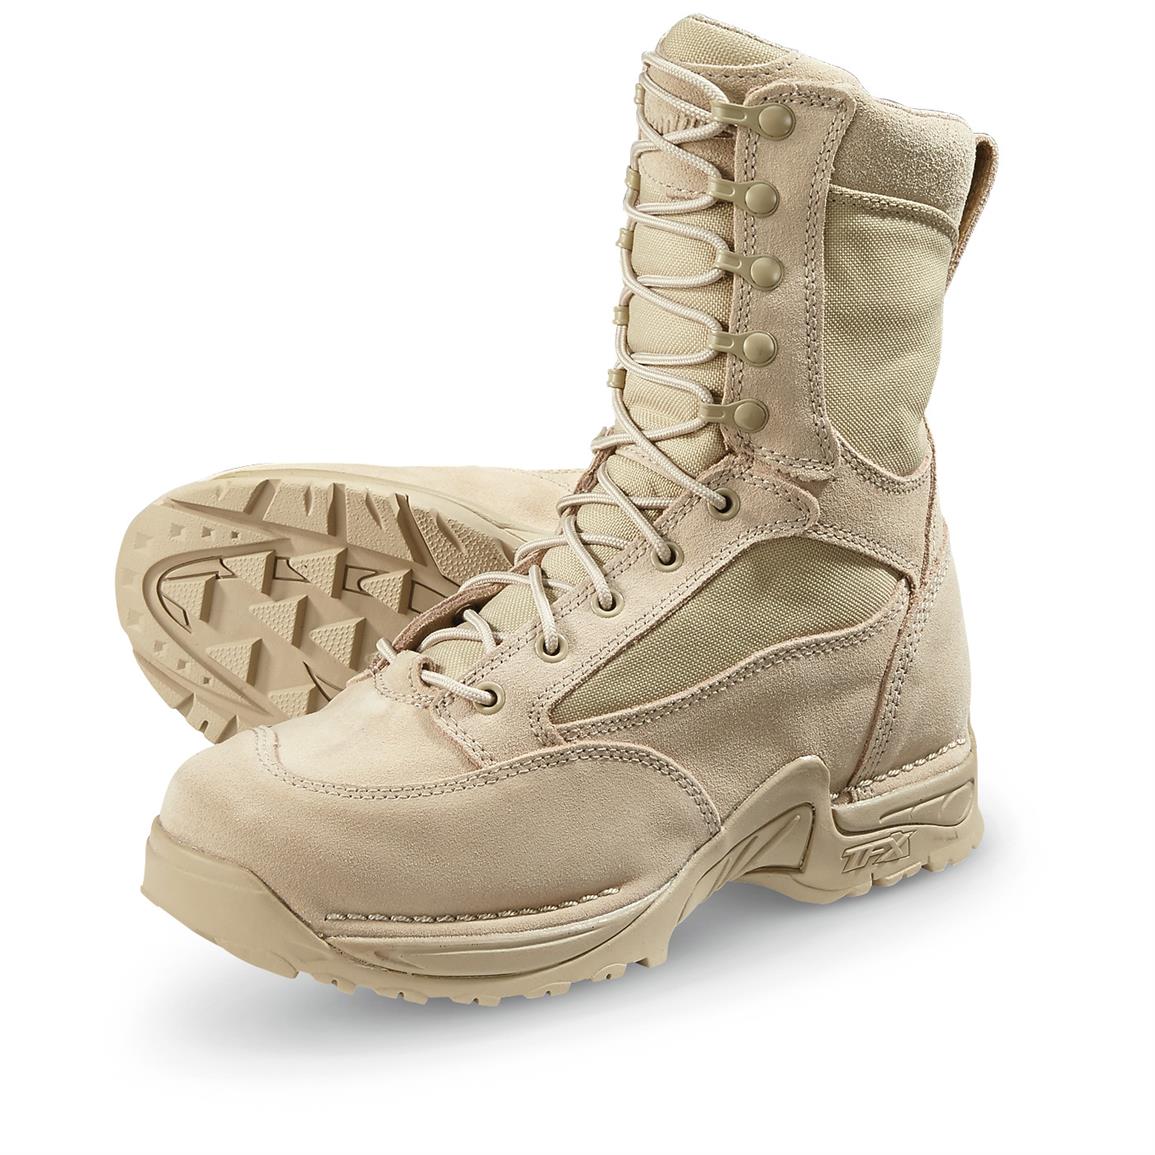 NEW Danner TFX G3 Desert Rough-Out Boots Tan Leather/Nylon Gore-tex 24307 8"